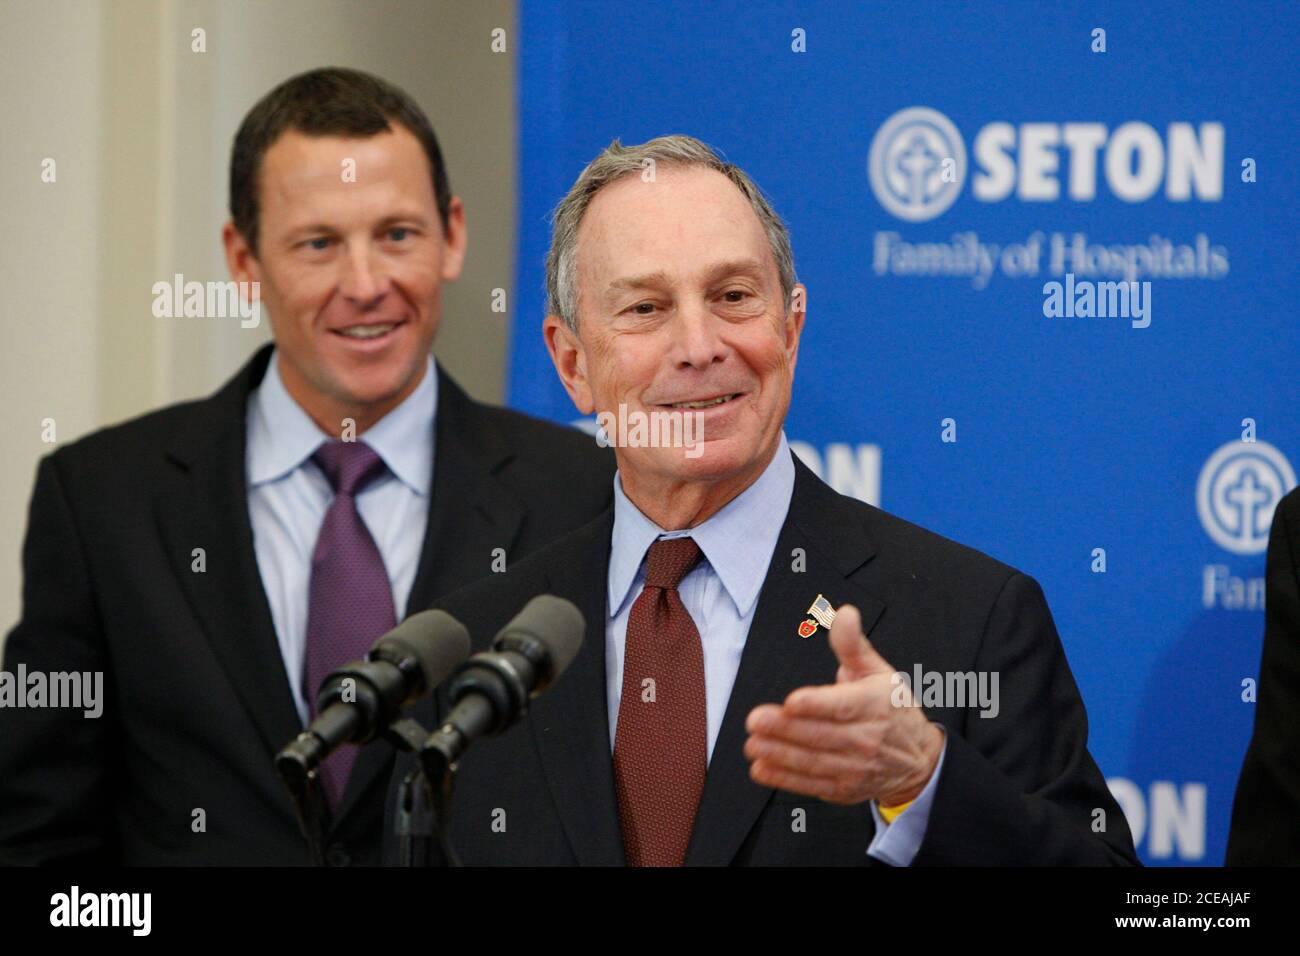 Austin, Texas USA, January 18, 2008: New York City Mayor Michael Bloomberg speaks to reporters about a new cancer health initiative as Lance Armstrong listens at Brackenridge Hospital after touring a cancer ward.  ©Bob Daemmrich Stock Photo